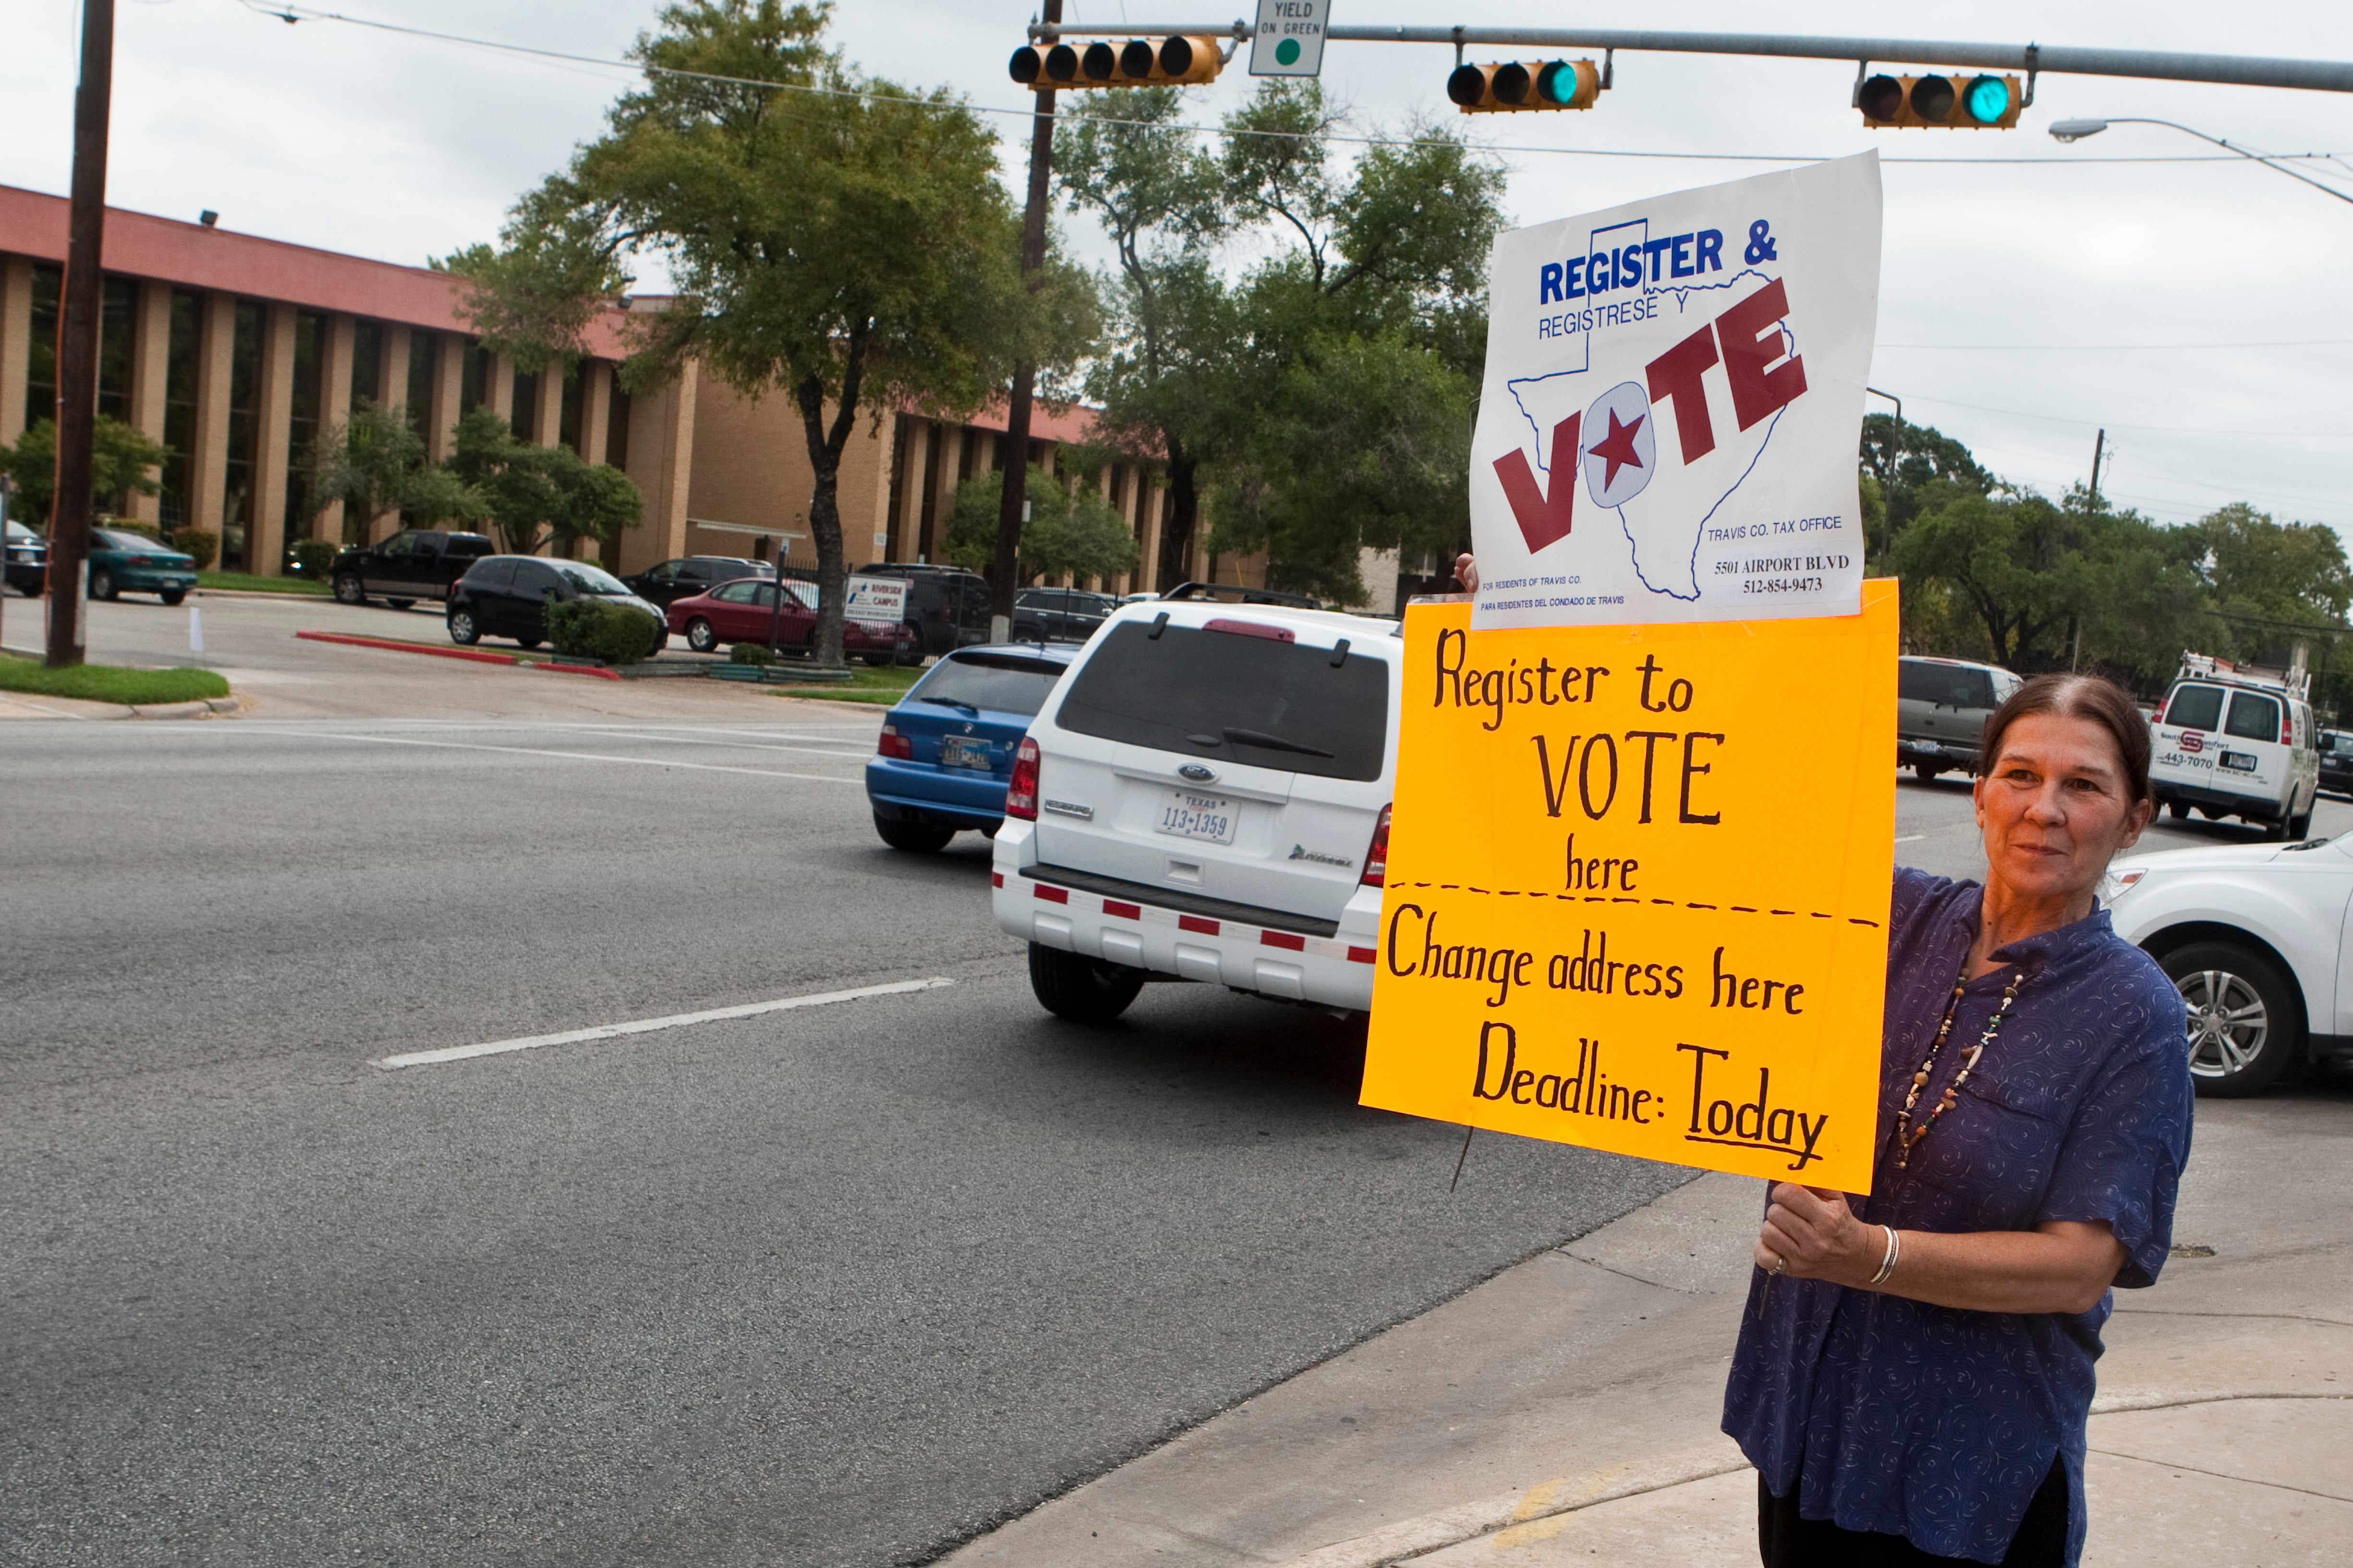 A woman stands at a street corner with signs reading, “Register to vote here,” and “Change address here. Deadline today.”